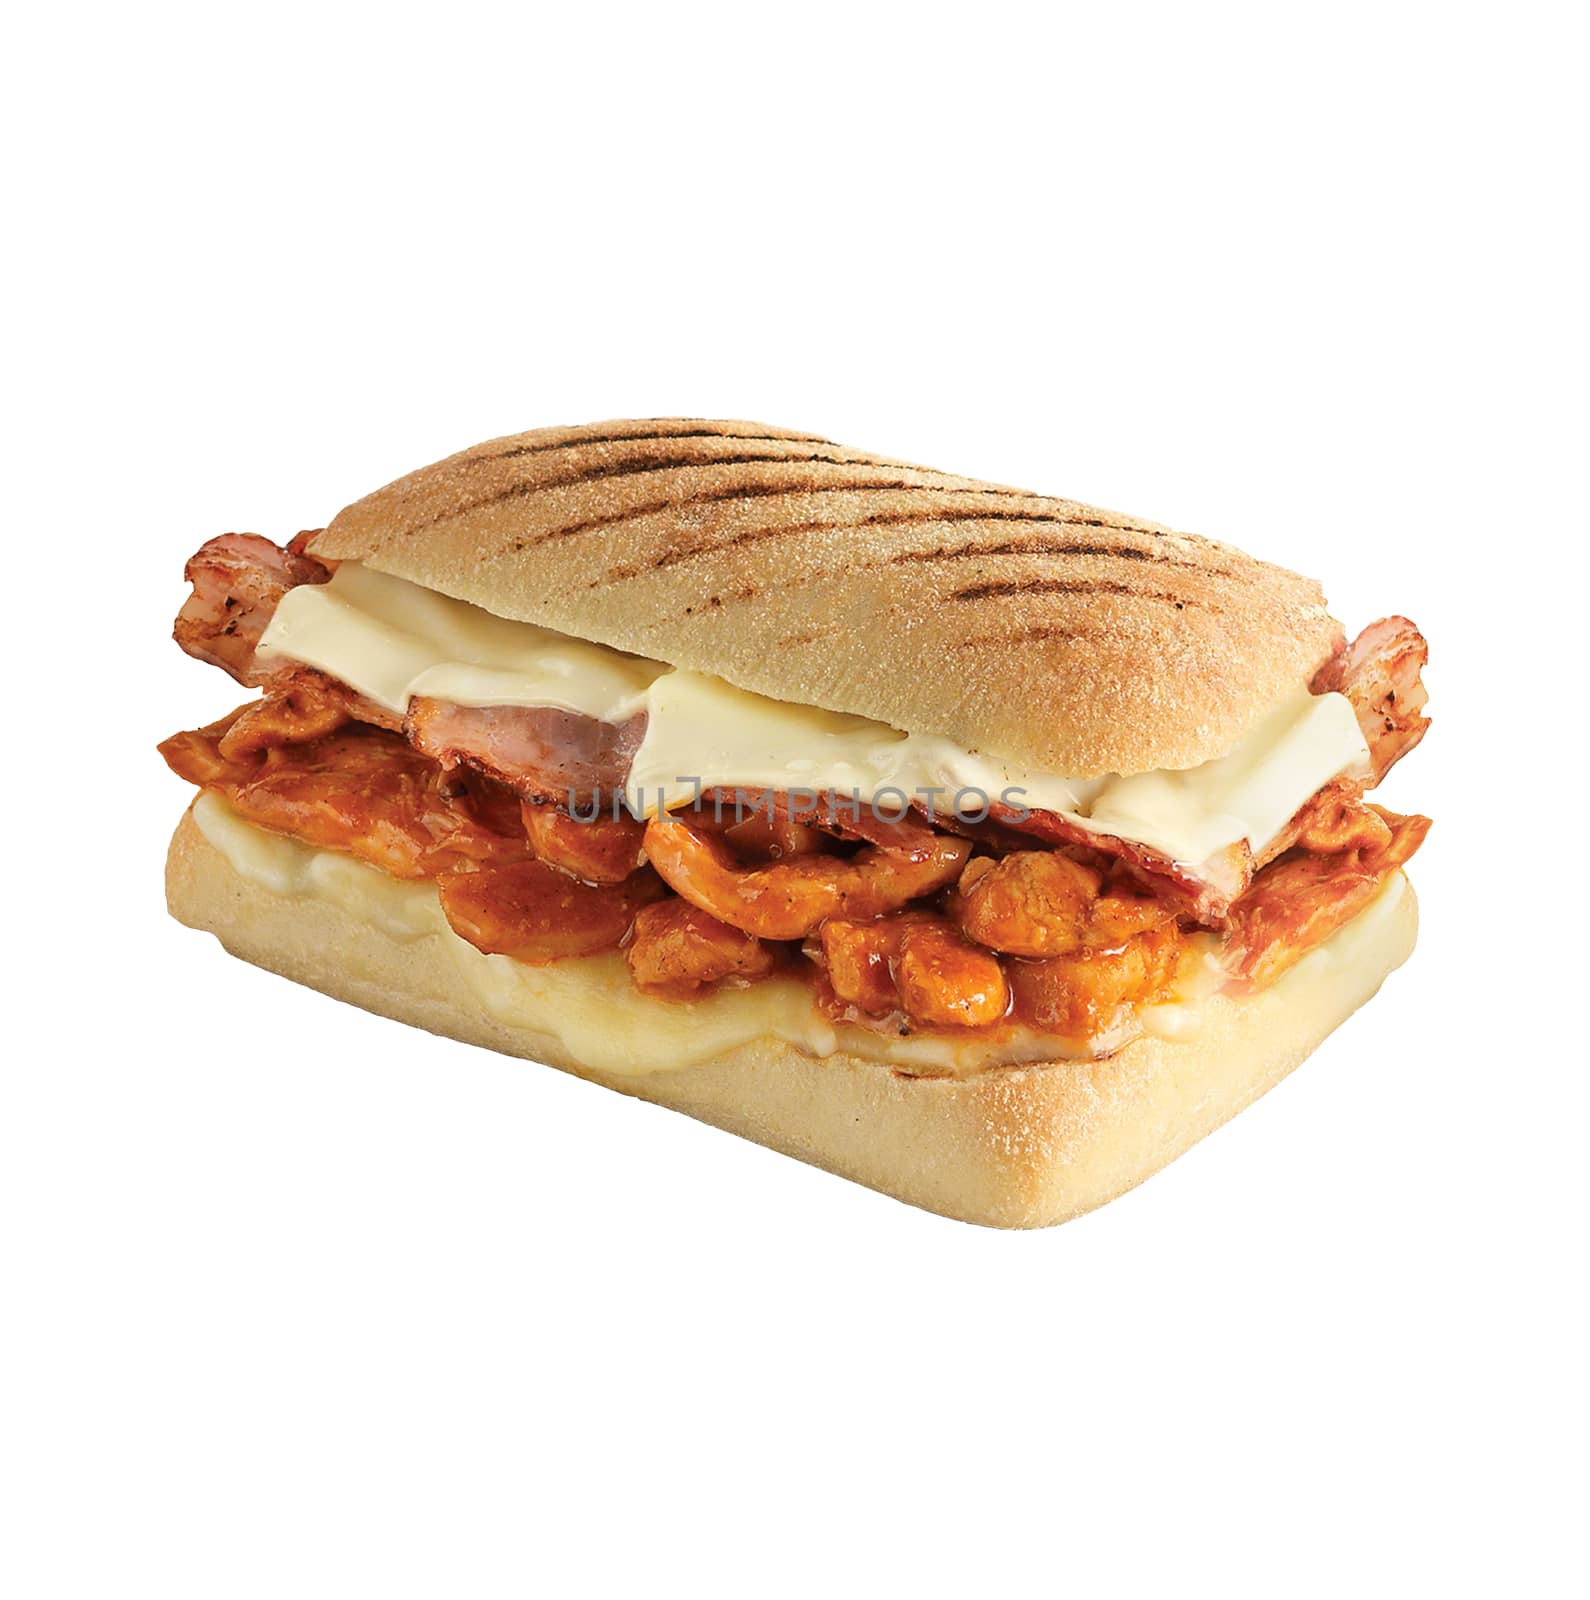 Bacon Sandwich isolated on white background with clipping path